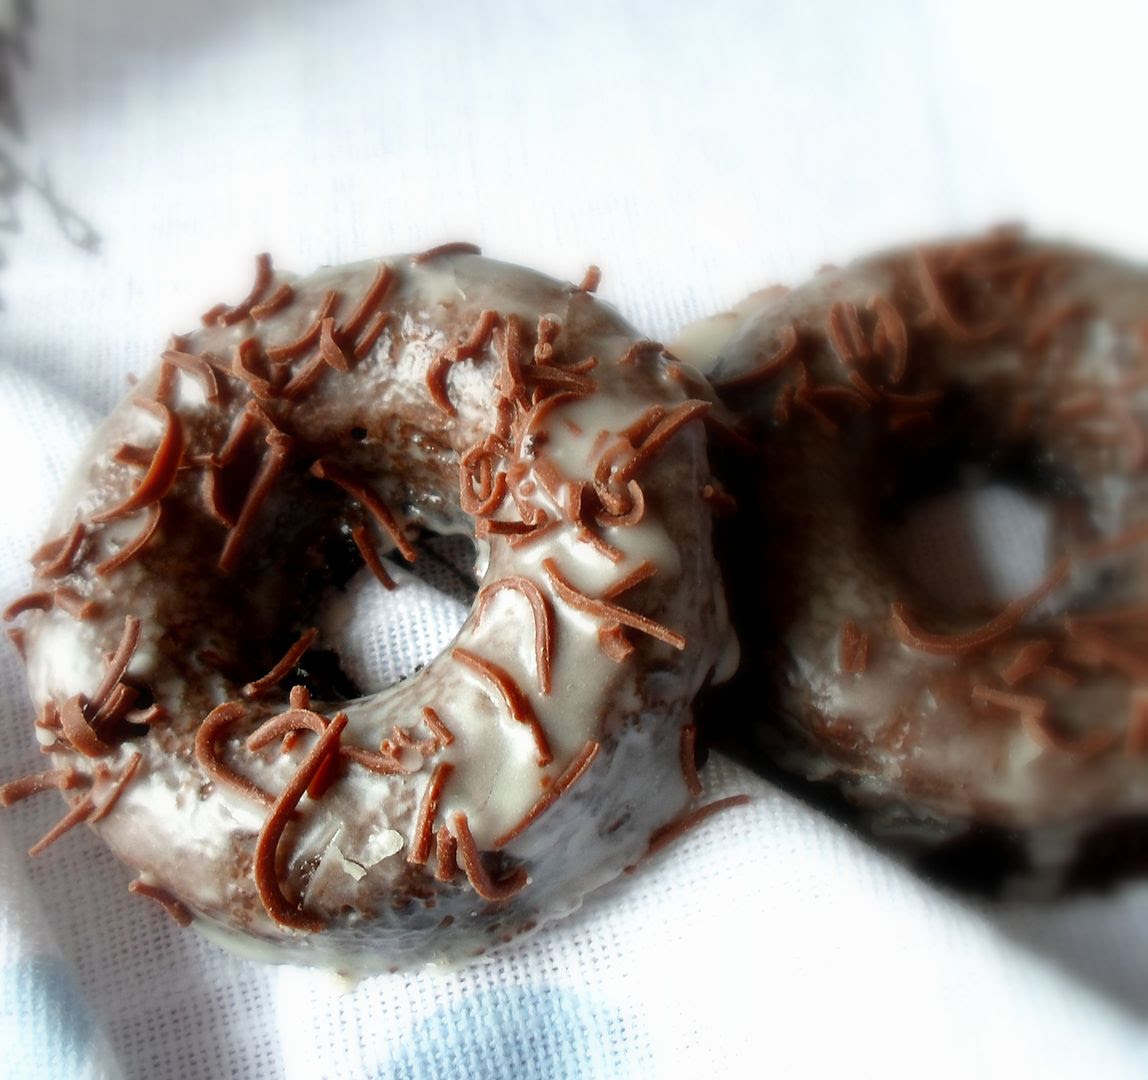 Baked Chocolate Buttermilk Donuts